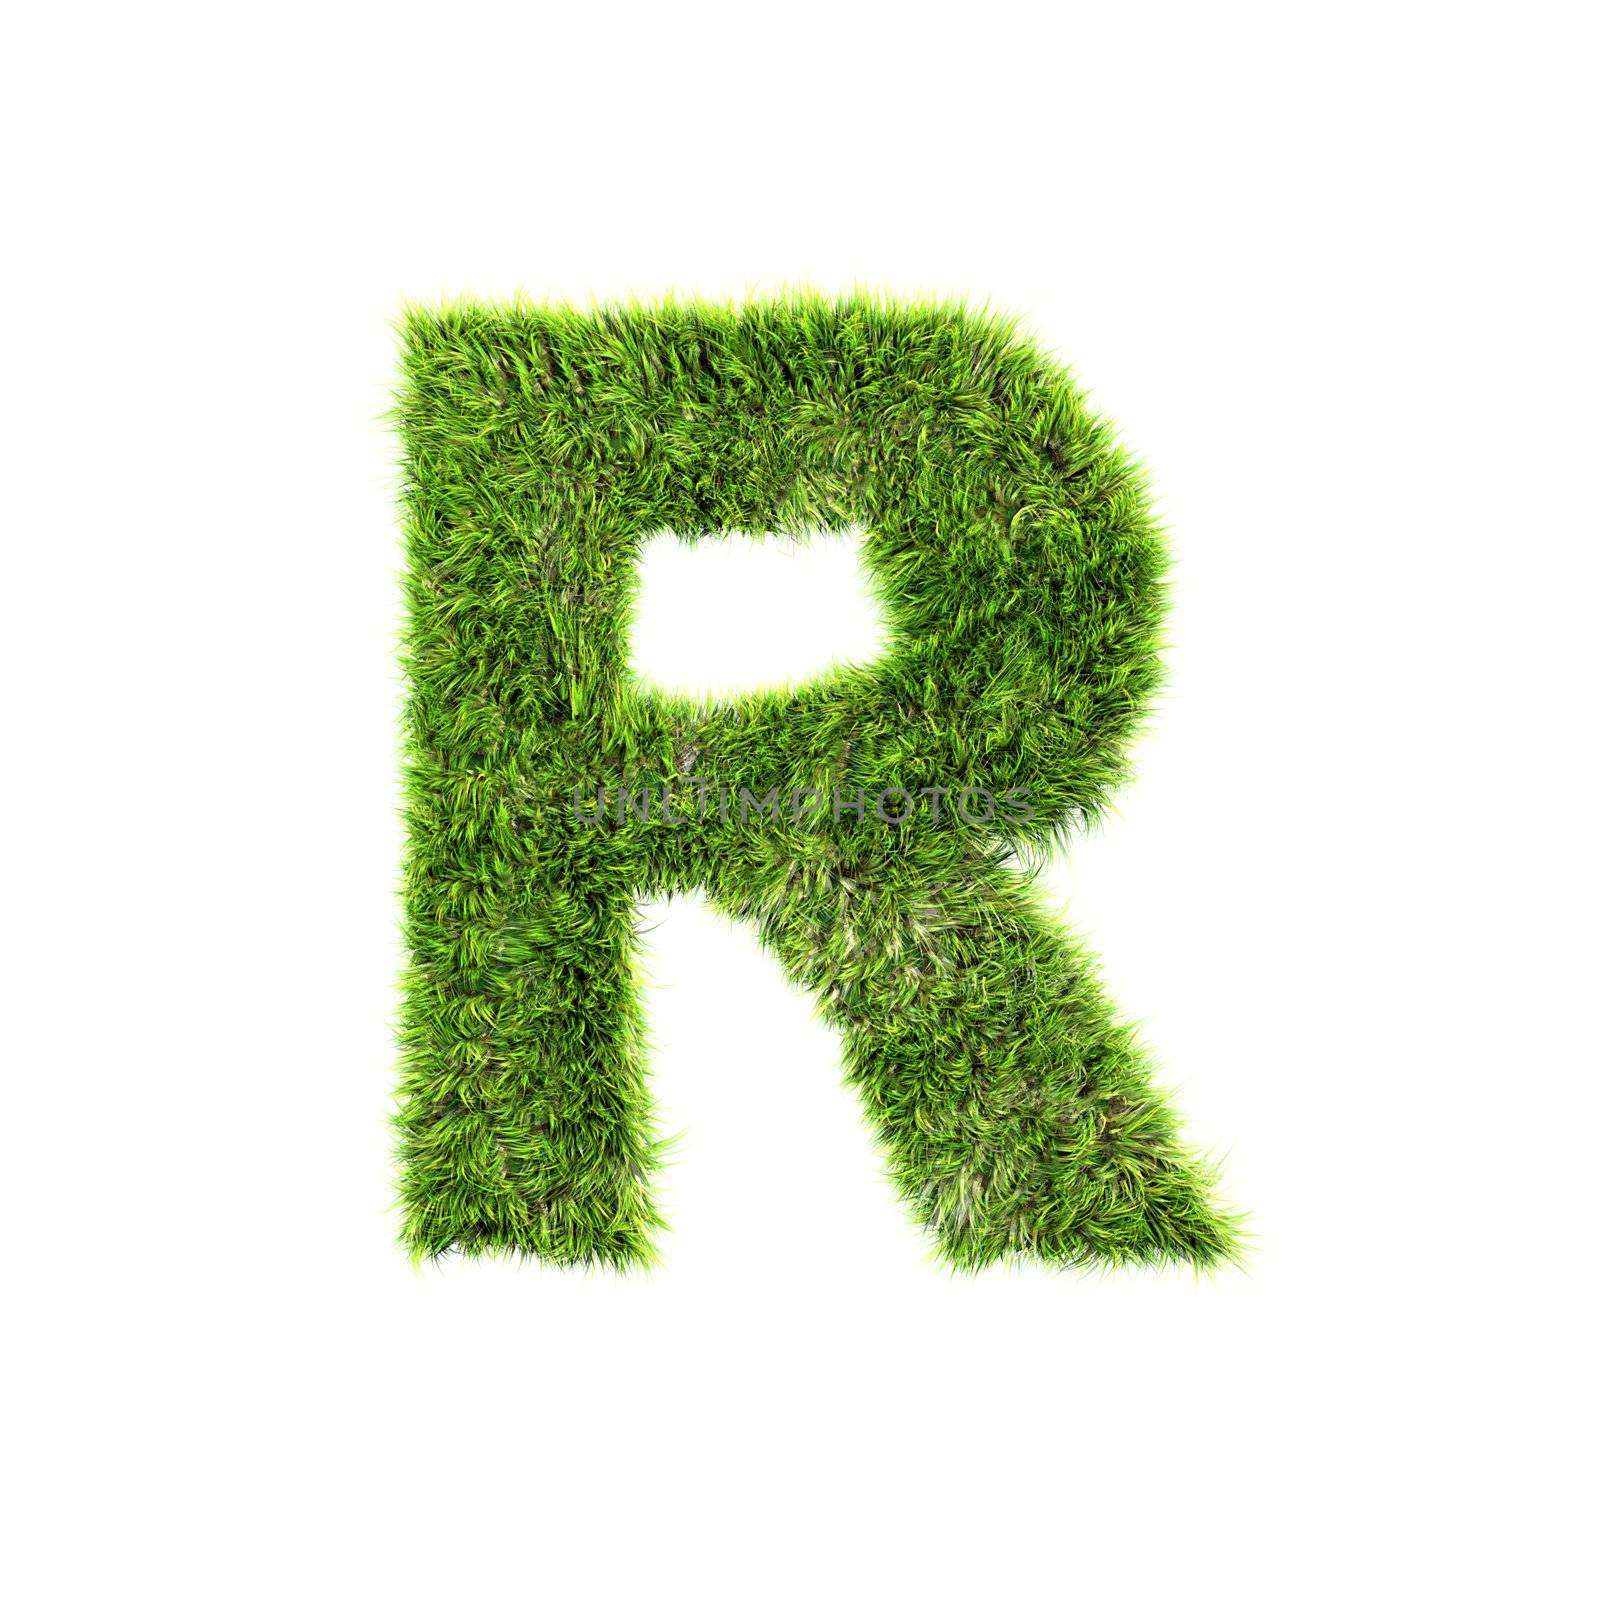 3d grass letter isolated on white background - R